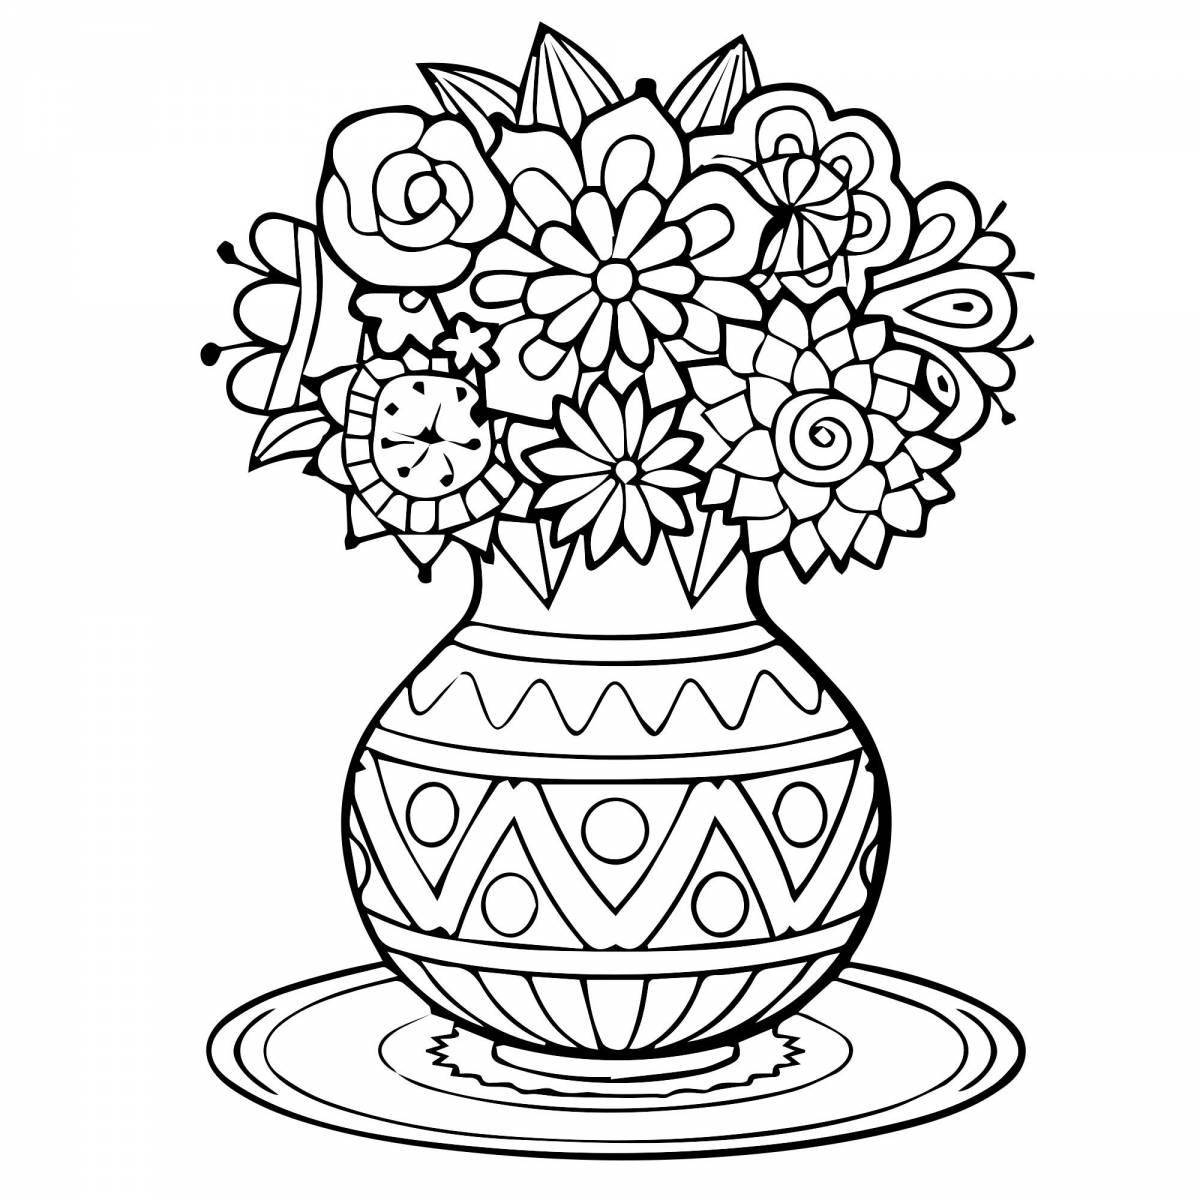 Coloring flowers in a vase for kids